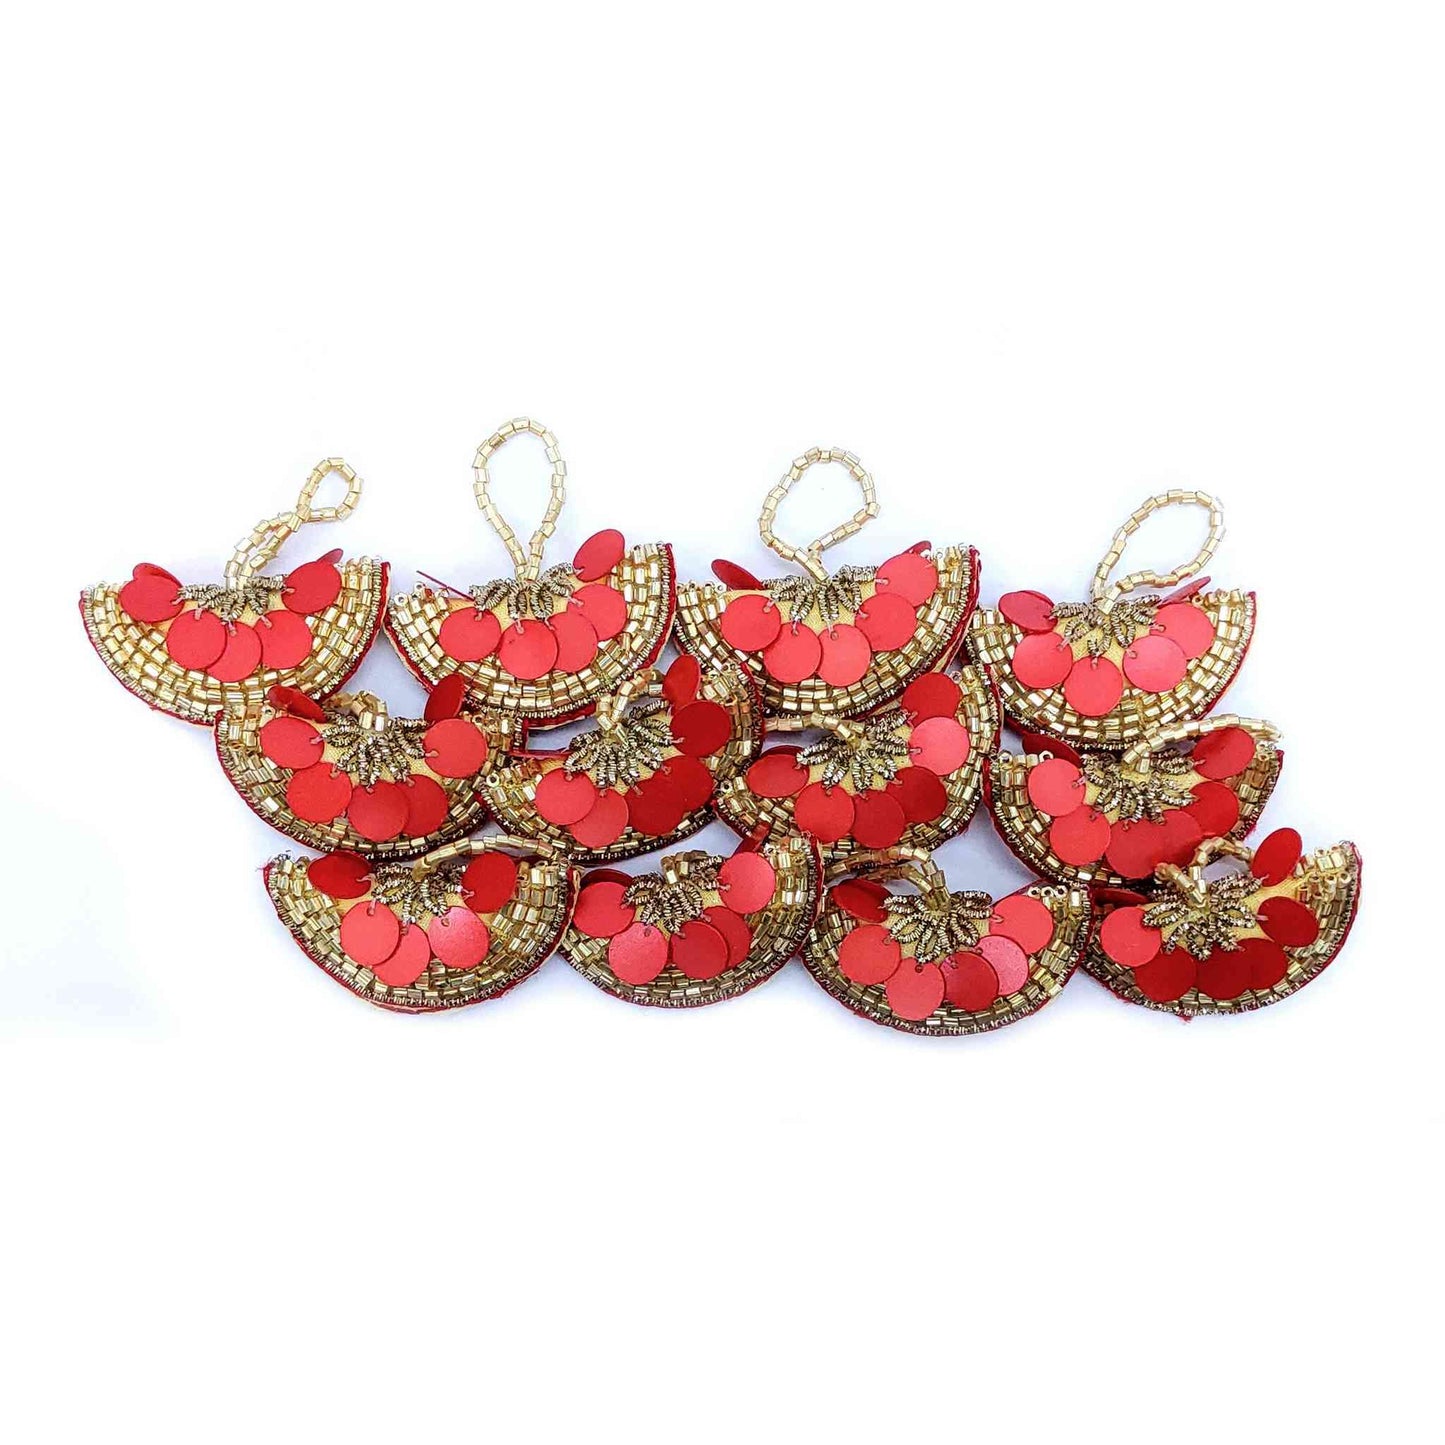 Indian Petals Designer Sequence Latkan Buti for DIY Craft, Trouseau Packing or Decoration (Bunch of 12) - Design 201, Red - Indian Petals